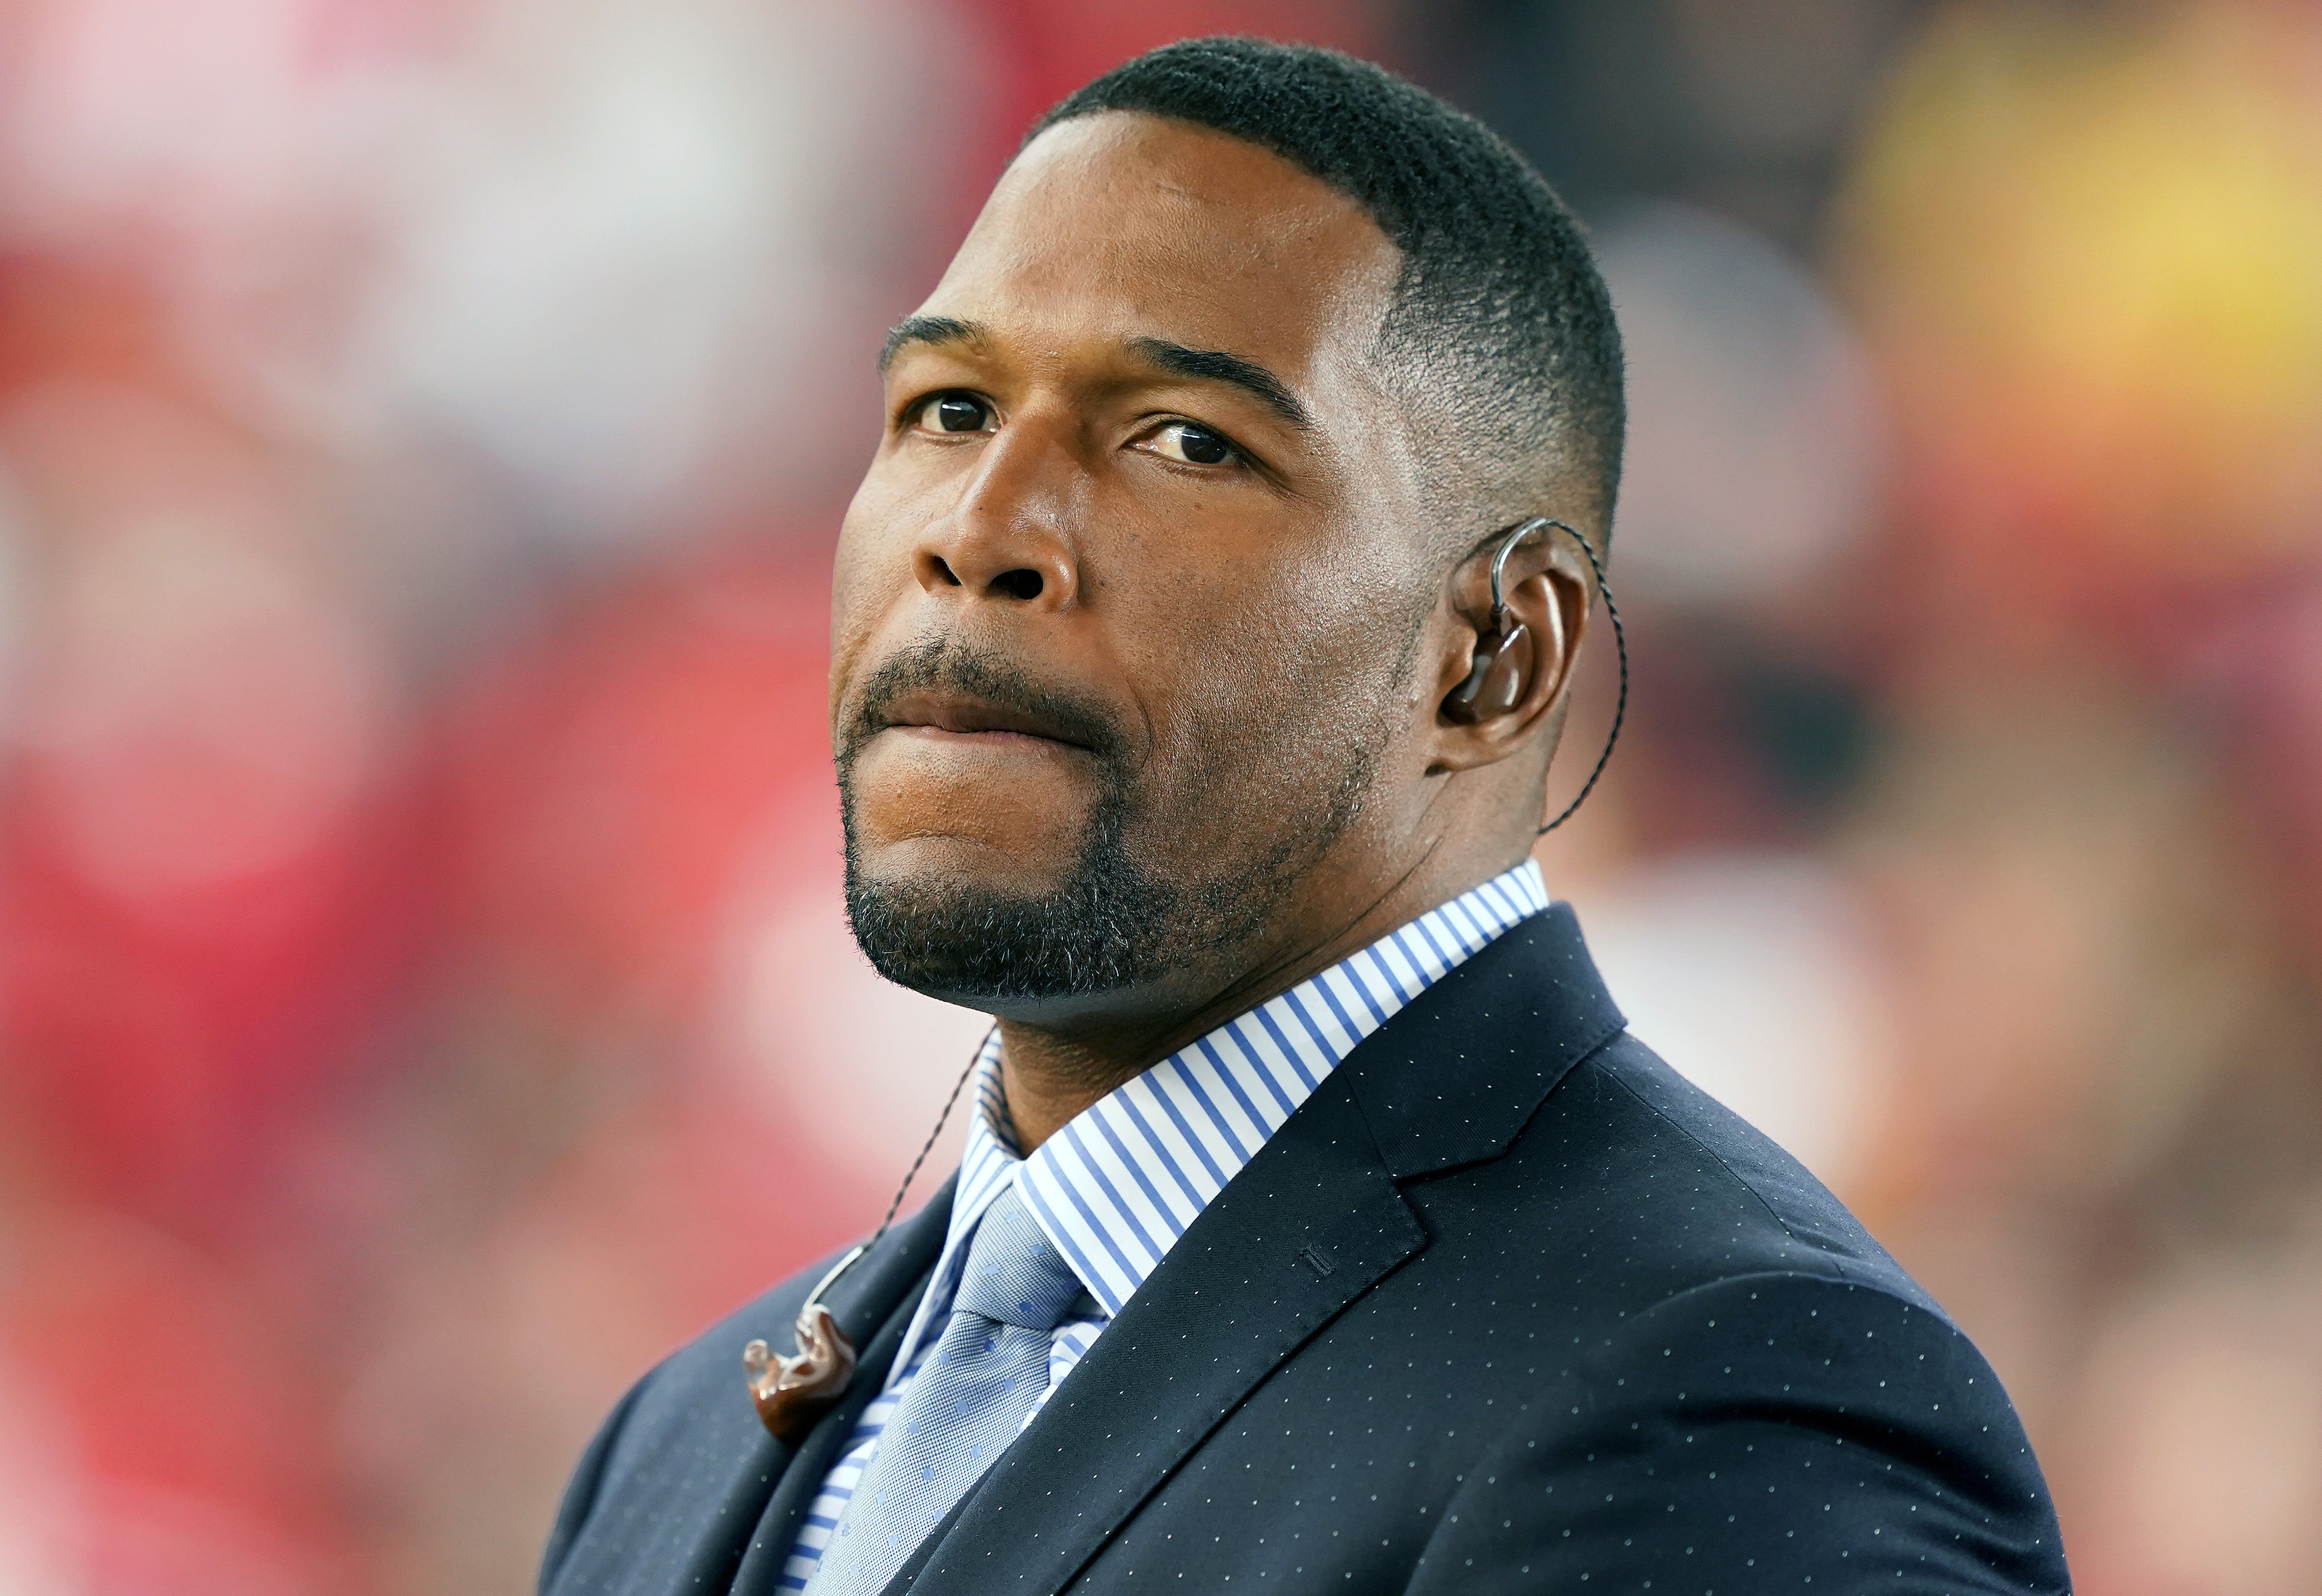 Michael Strahan at the NFC Championship game between the San Francisco 49ers and the Green Bay Packers in January 2020. | Photo: Getty Images